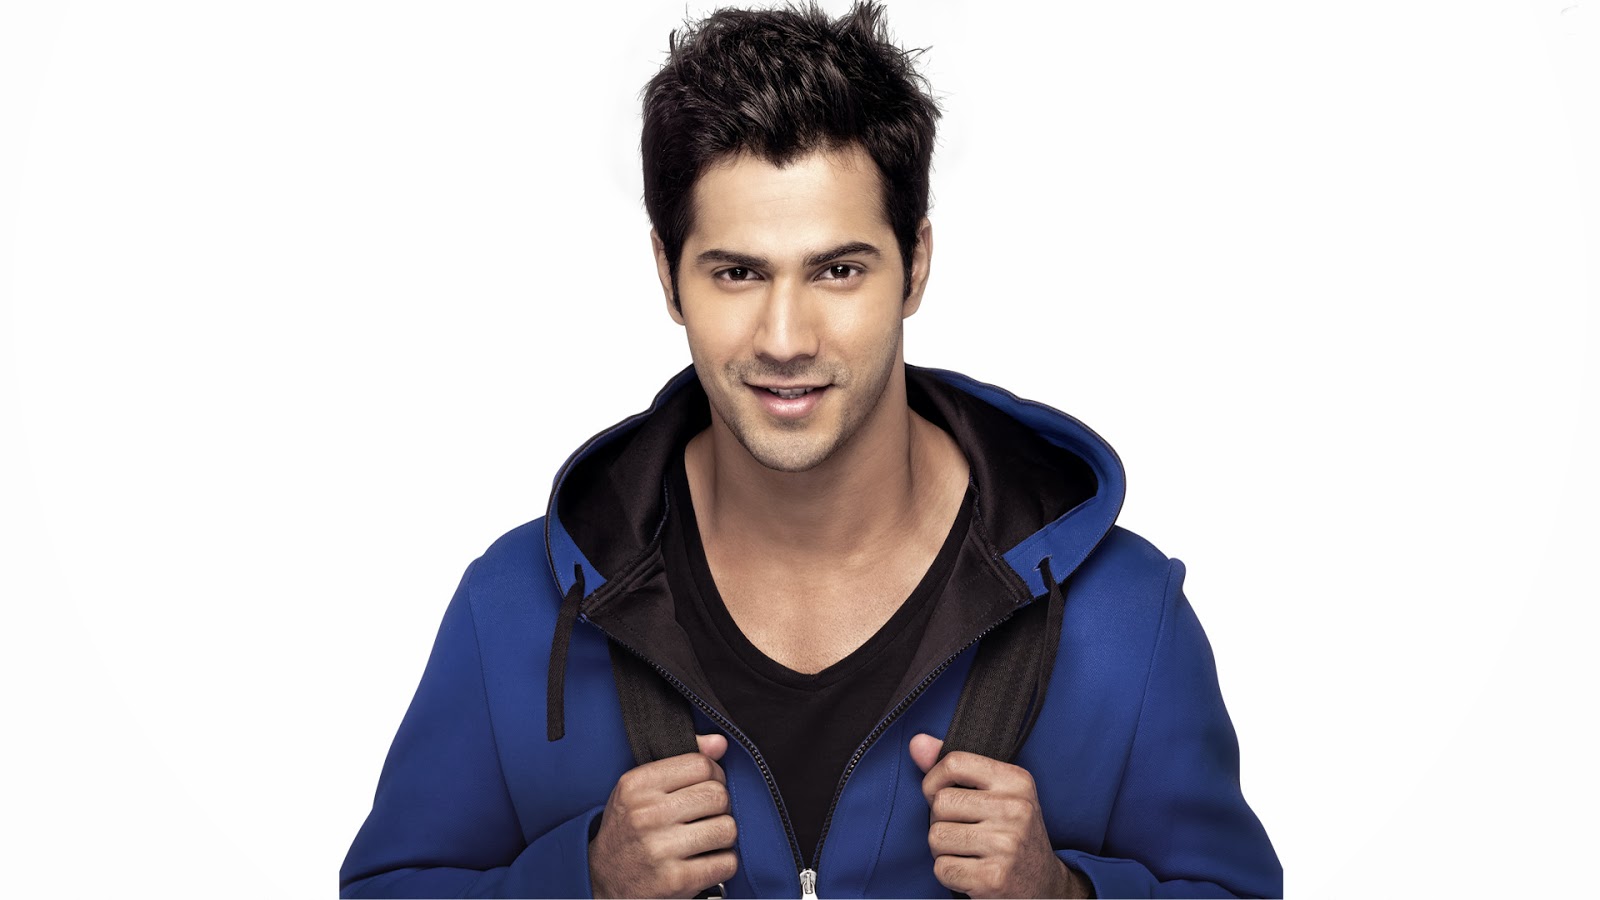 Varun Dhawan Smile Wallpapers Wallpaper Hd Celebrities 4k Wallpapers Images And Background